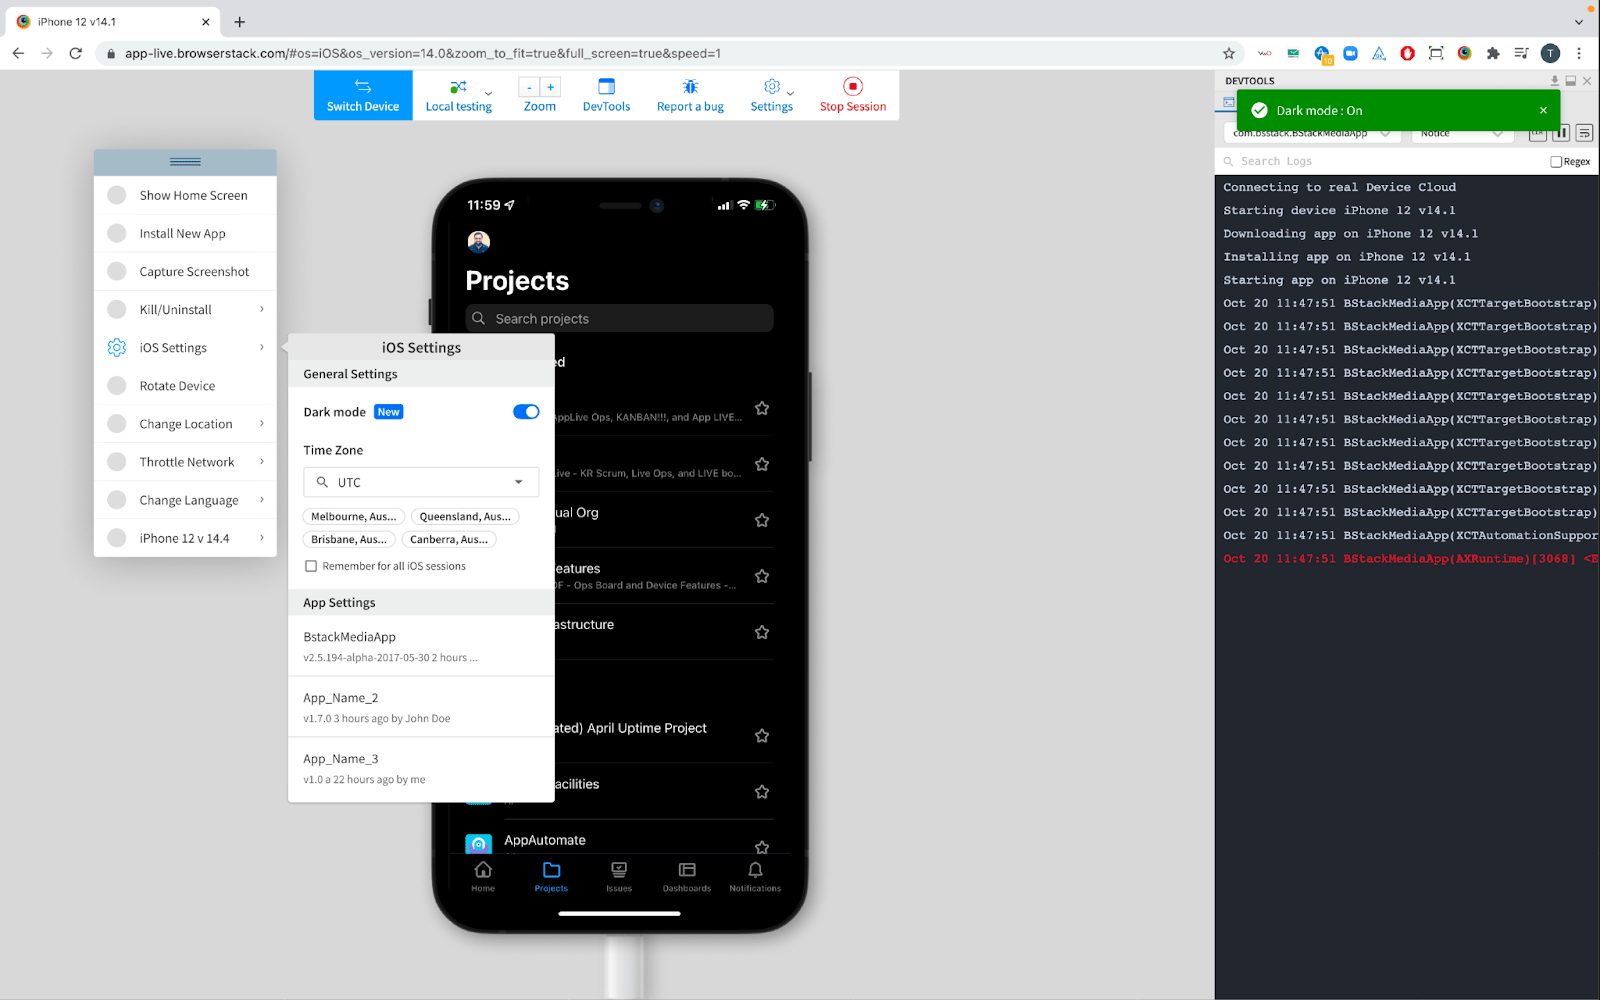 Screenshot showing when dark mode feature is turned ON in iOS settings section